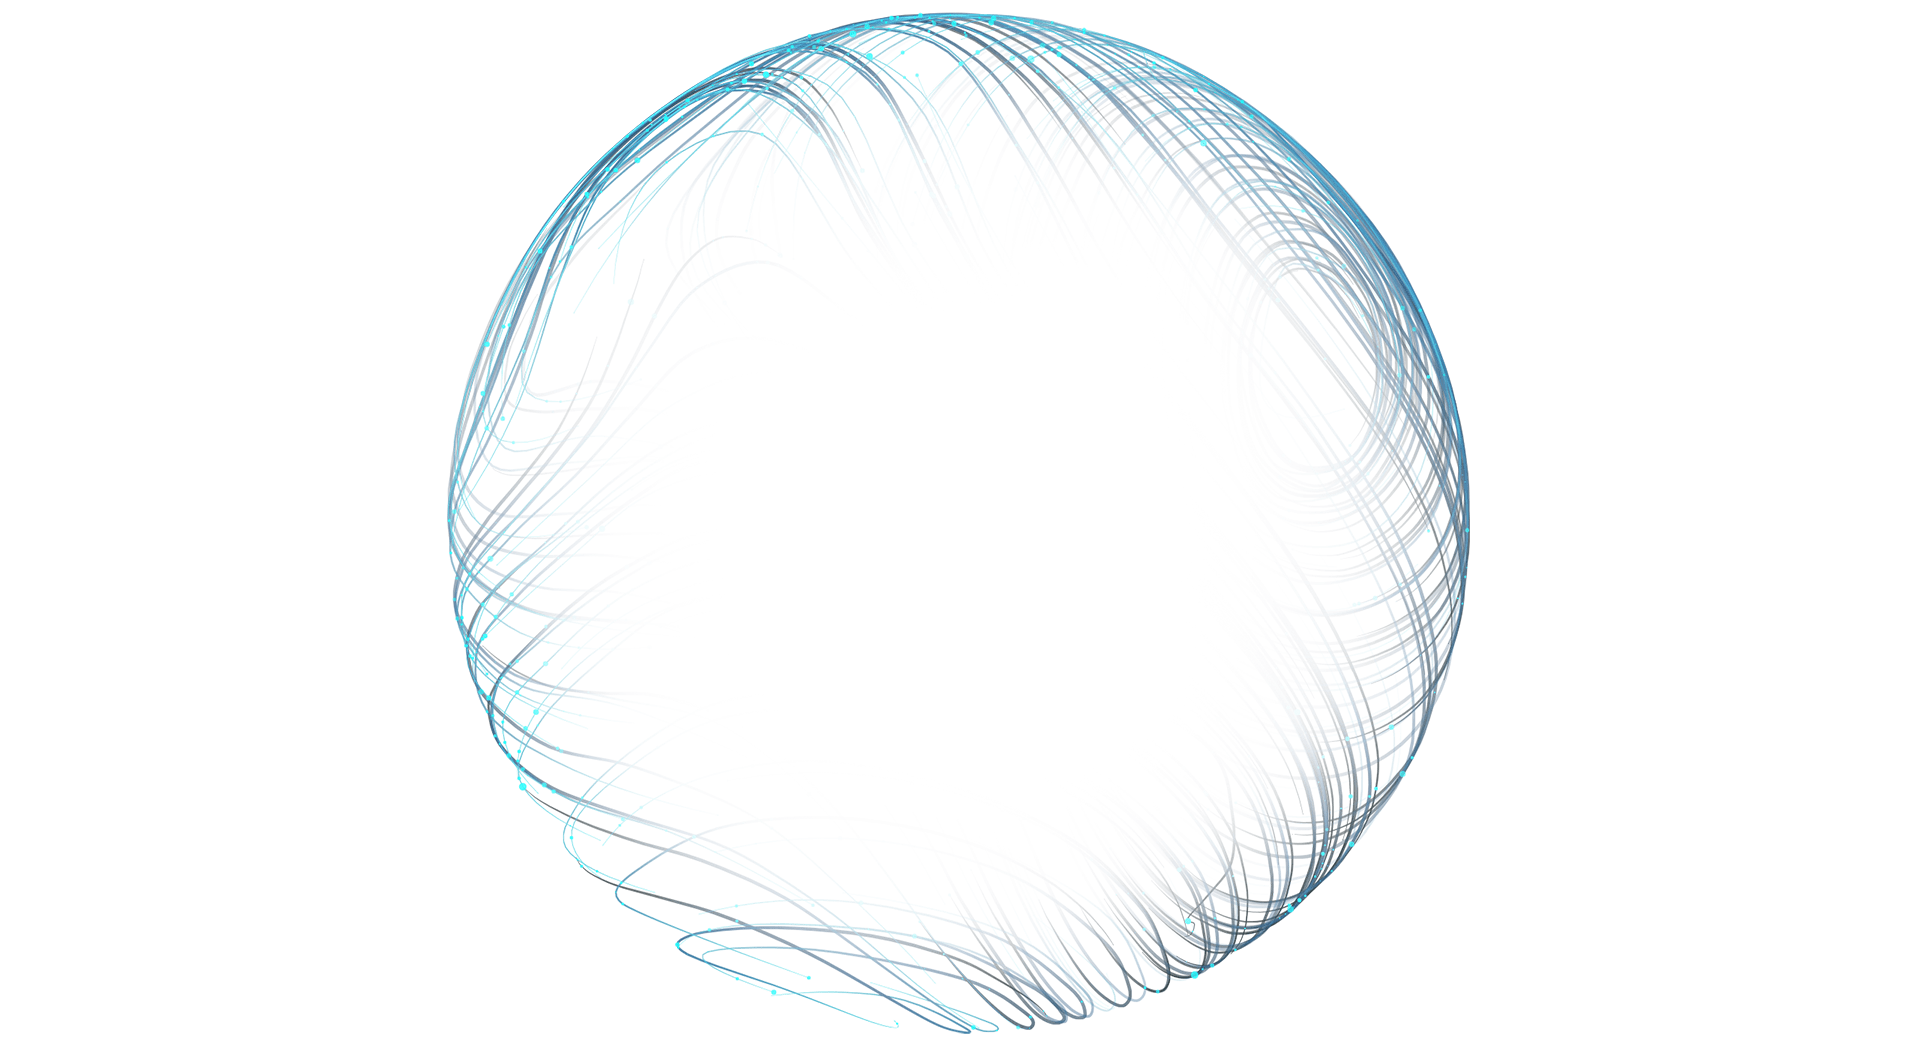 Rotating circle made of several fine lines